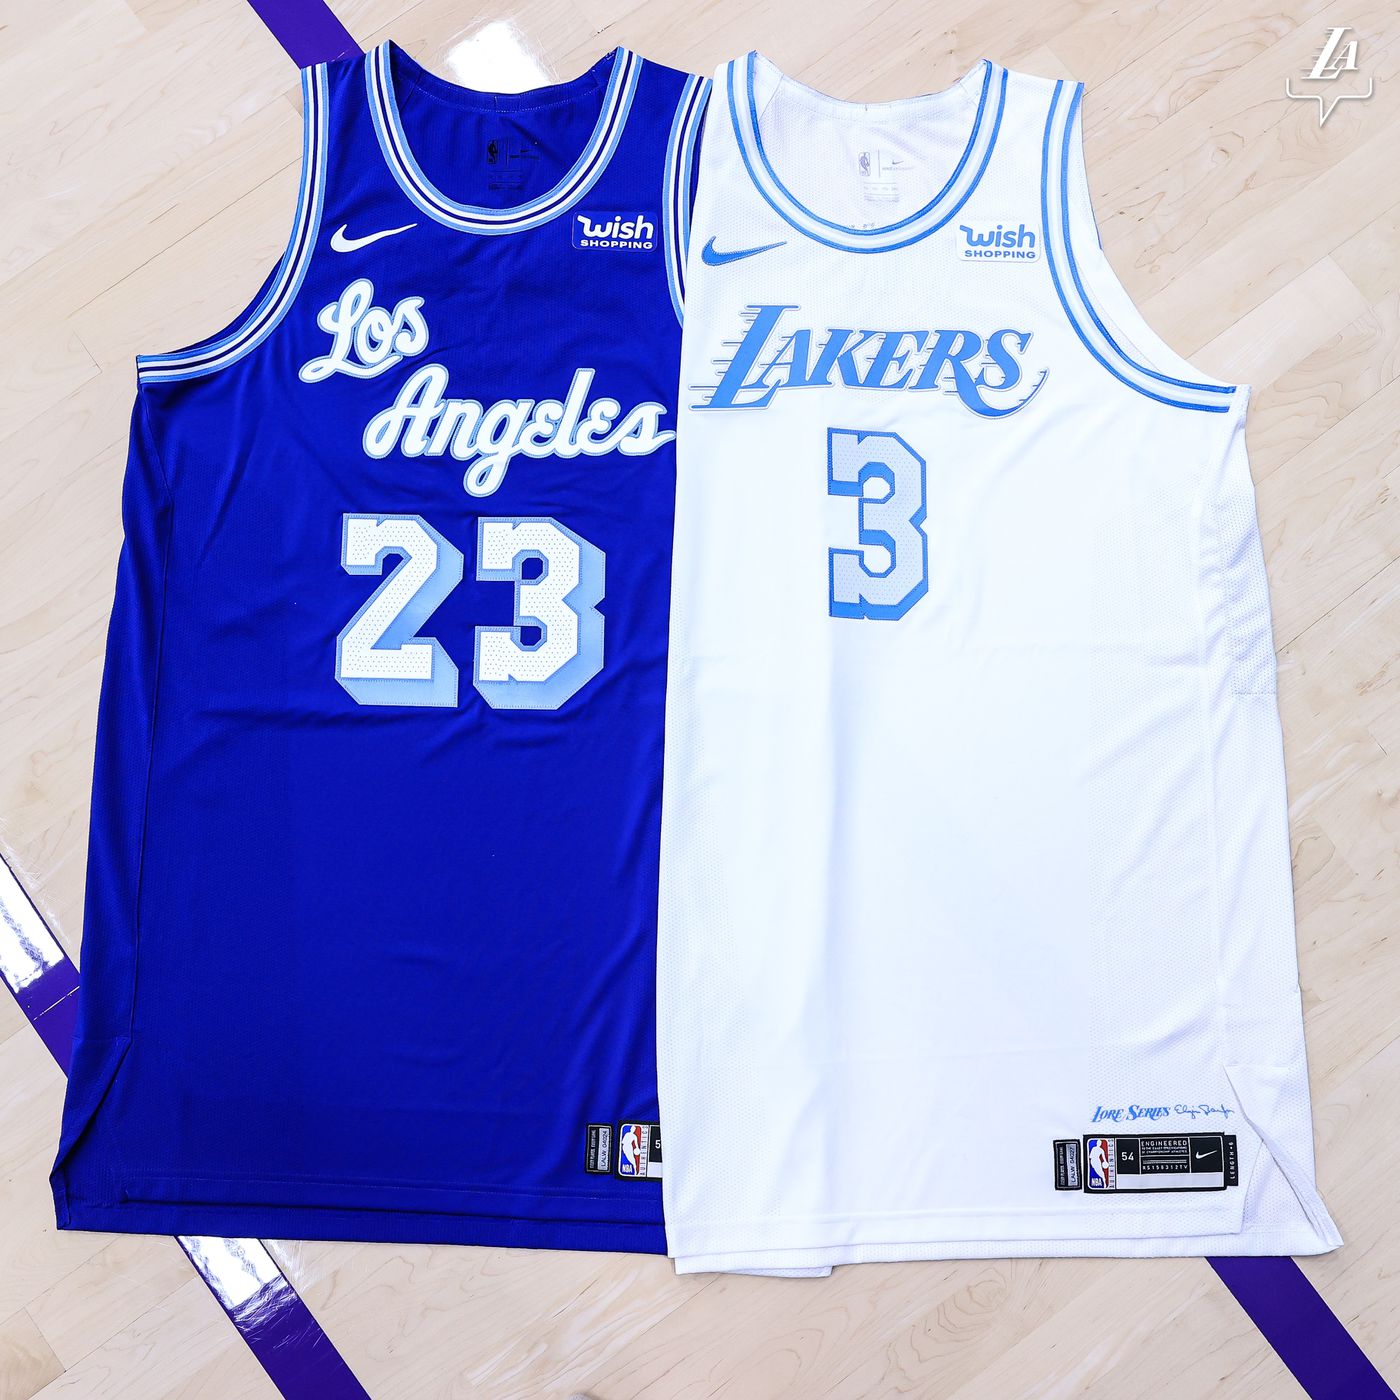 New Elgin inspired Lakers jerseys are fresh take classic - Silver Screen and Roll